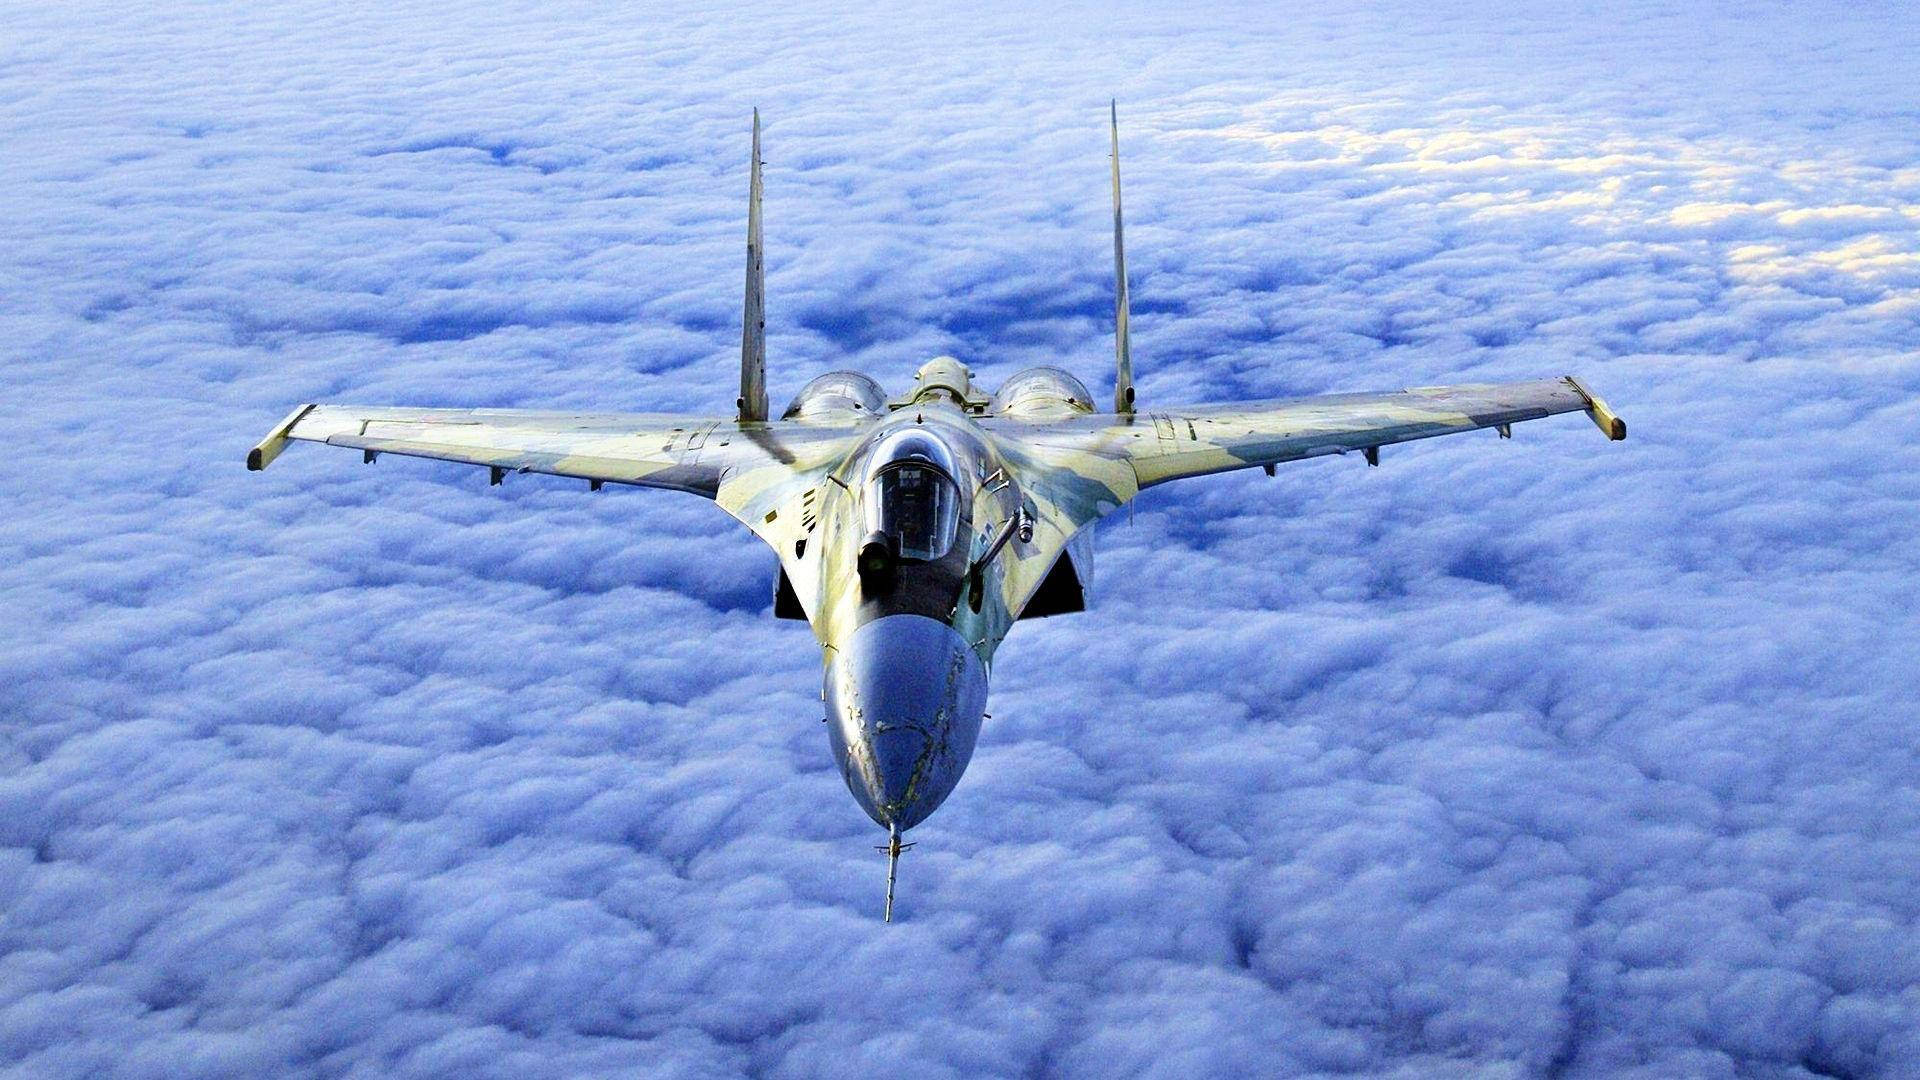 Fighter Jet Over A Cloud Cover Wallpaper